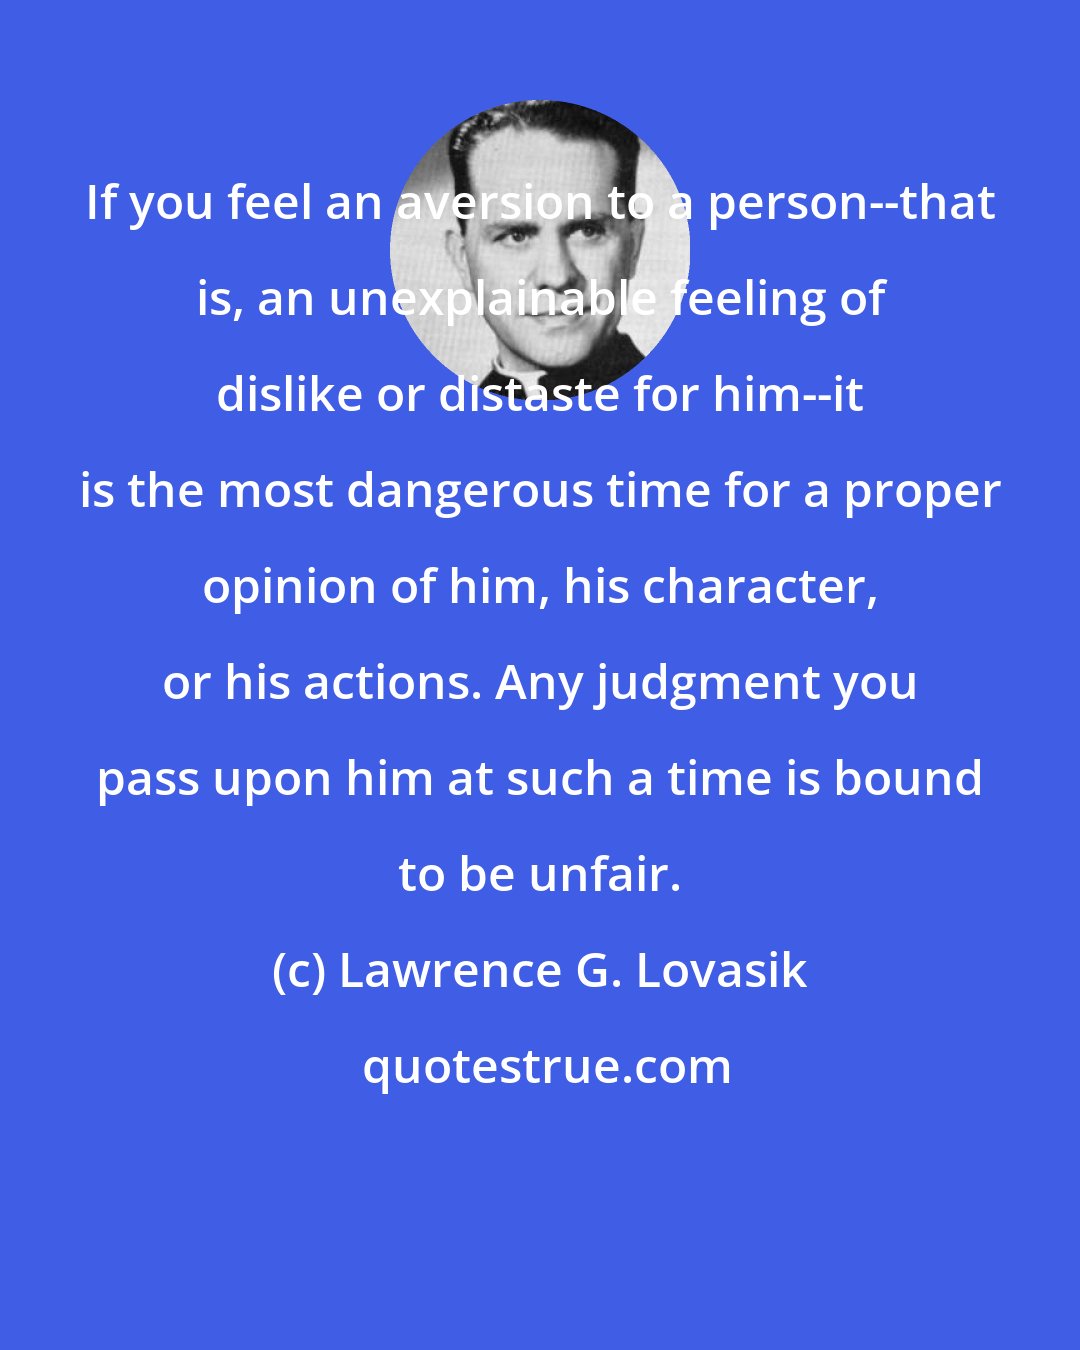 Lawrence G. Lovasik: If you feel an aversion to a person--that is, an unexplainable feeling of dislike or distaste for him--it is the most dangerous time for a proper opinion of him, his character, or his actions. Any judgment you pass upon him at such a time is bound to be unfair.